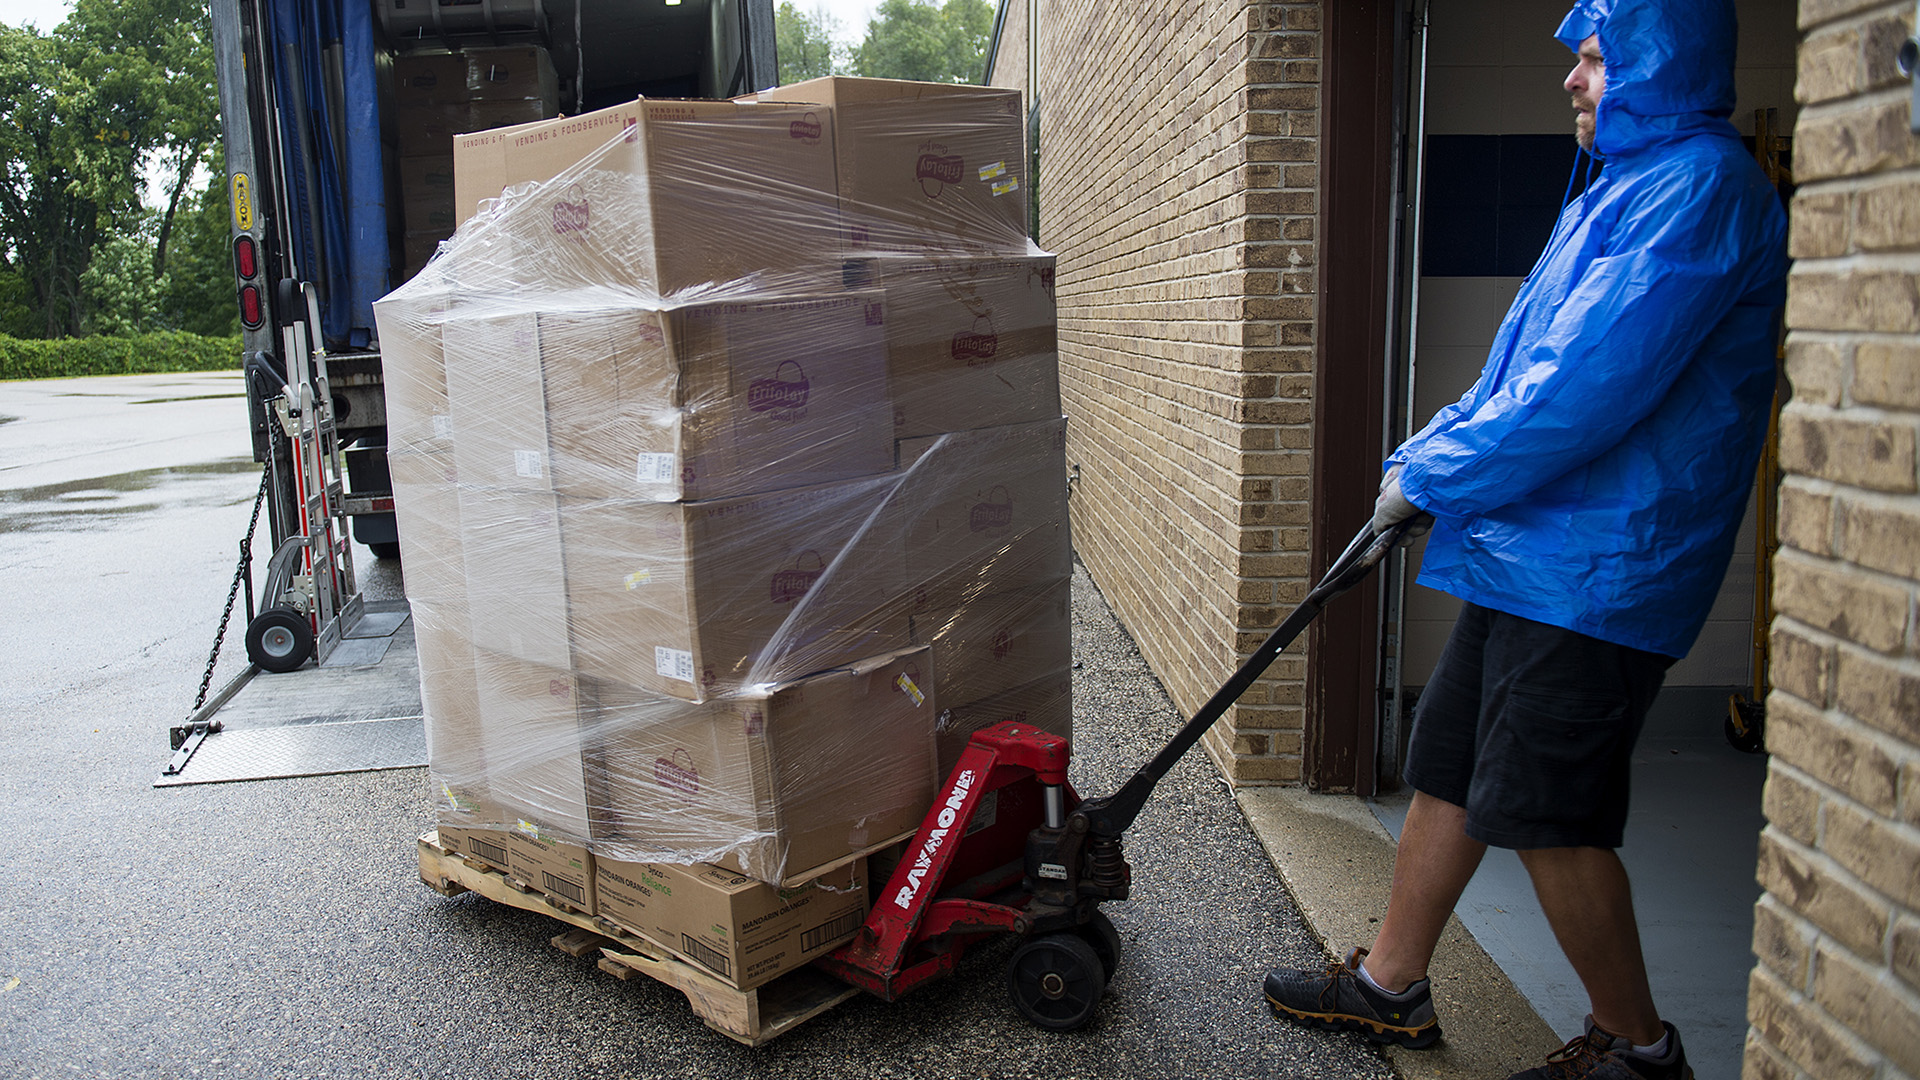 A man wearing a raincoat pulls a hydrualic pallet jack stacked with plastic-wrapped cardboard boxes through a large door facing a driveway in which a truck is parked.